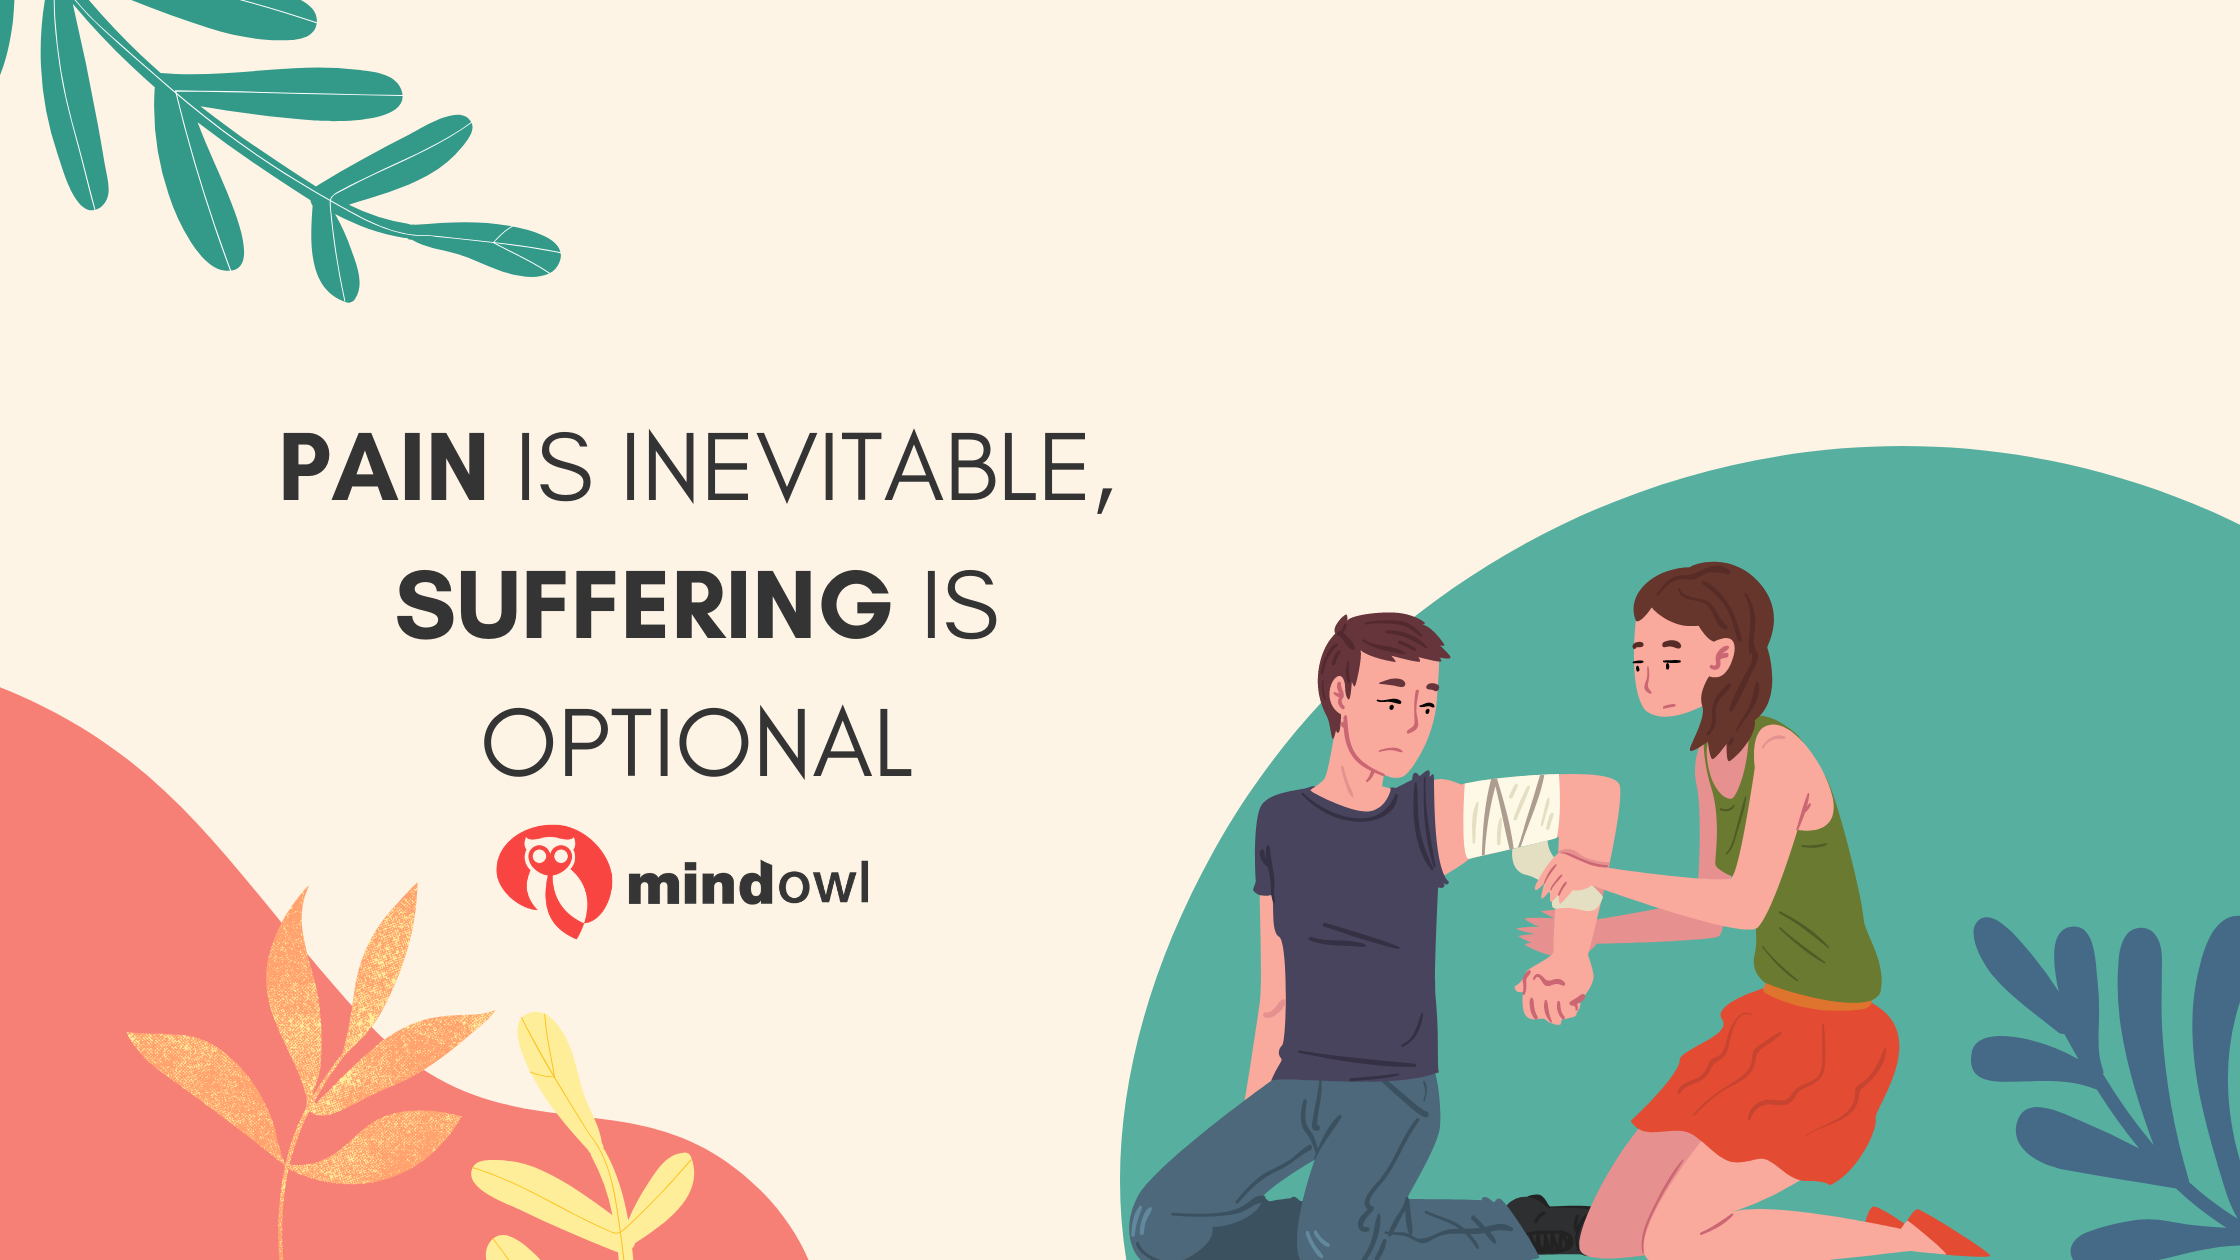 Pain is inevitable, suffering is optional | How to avoid suffering unnecessarily